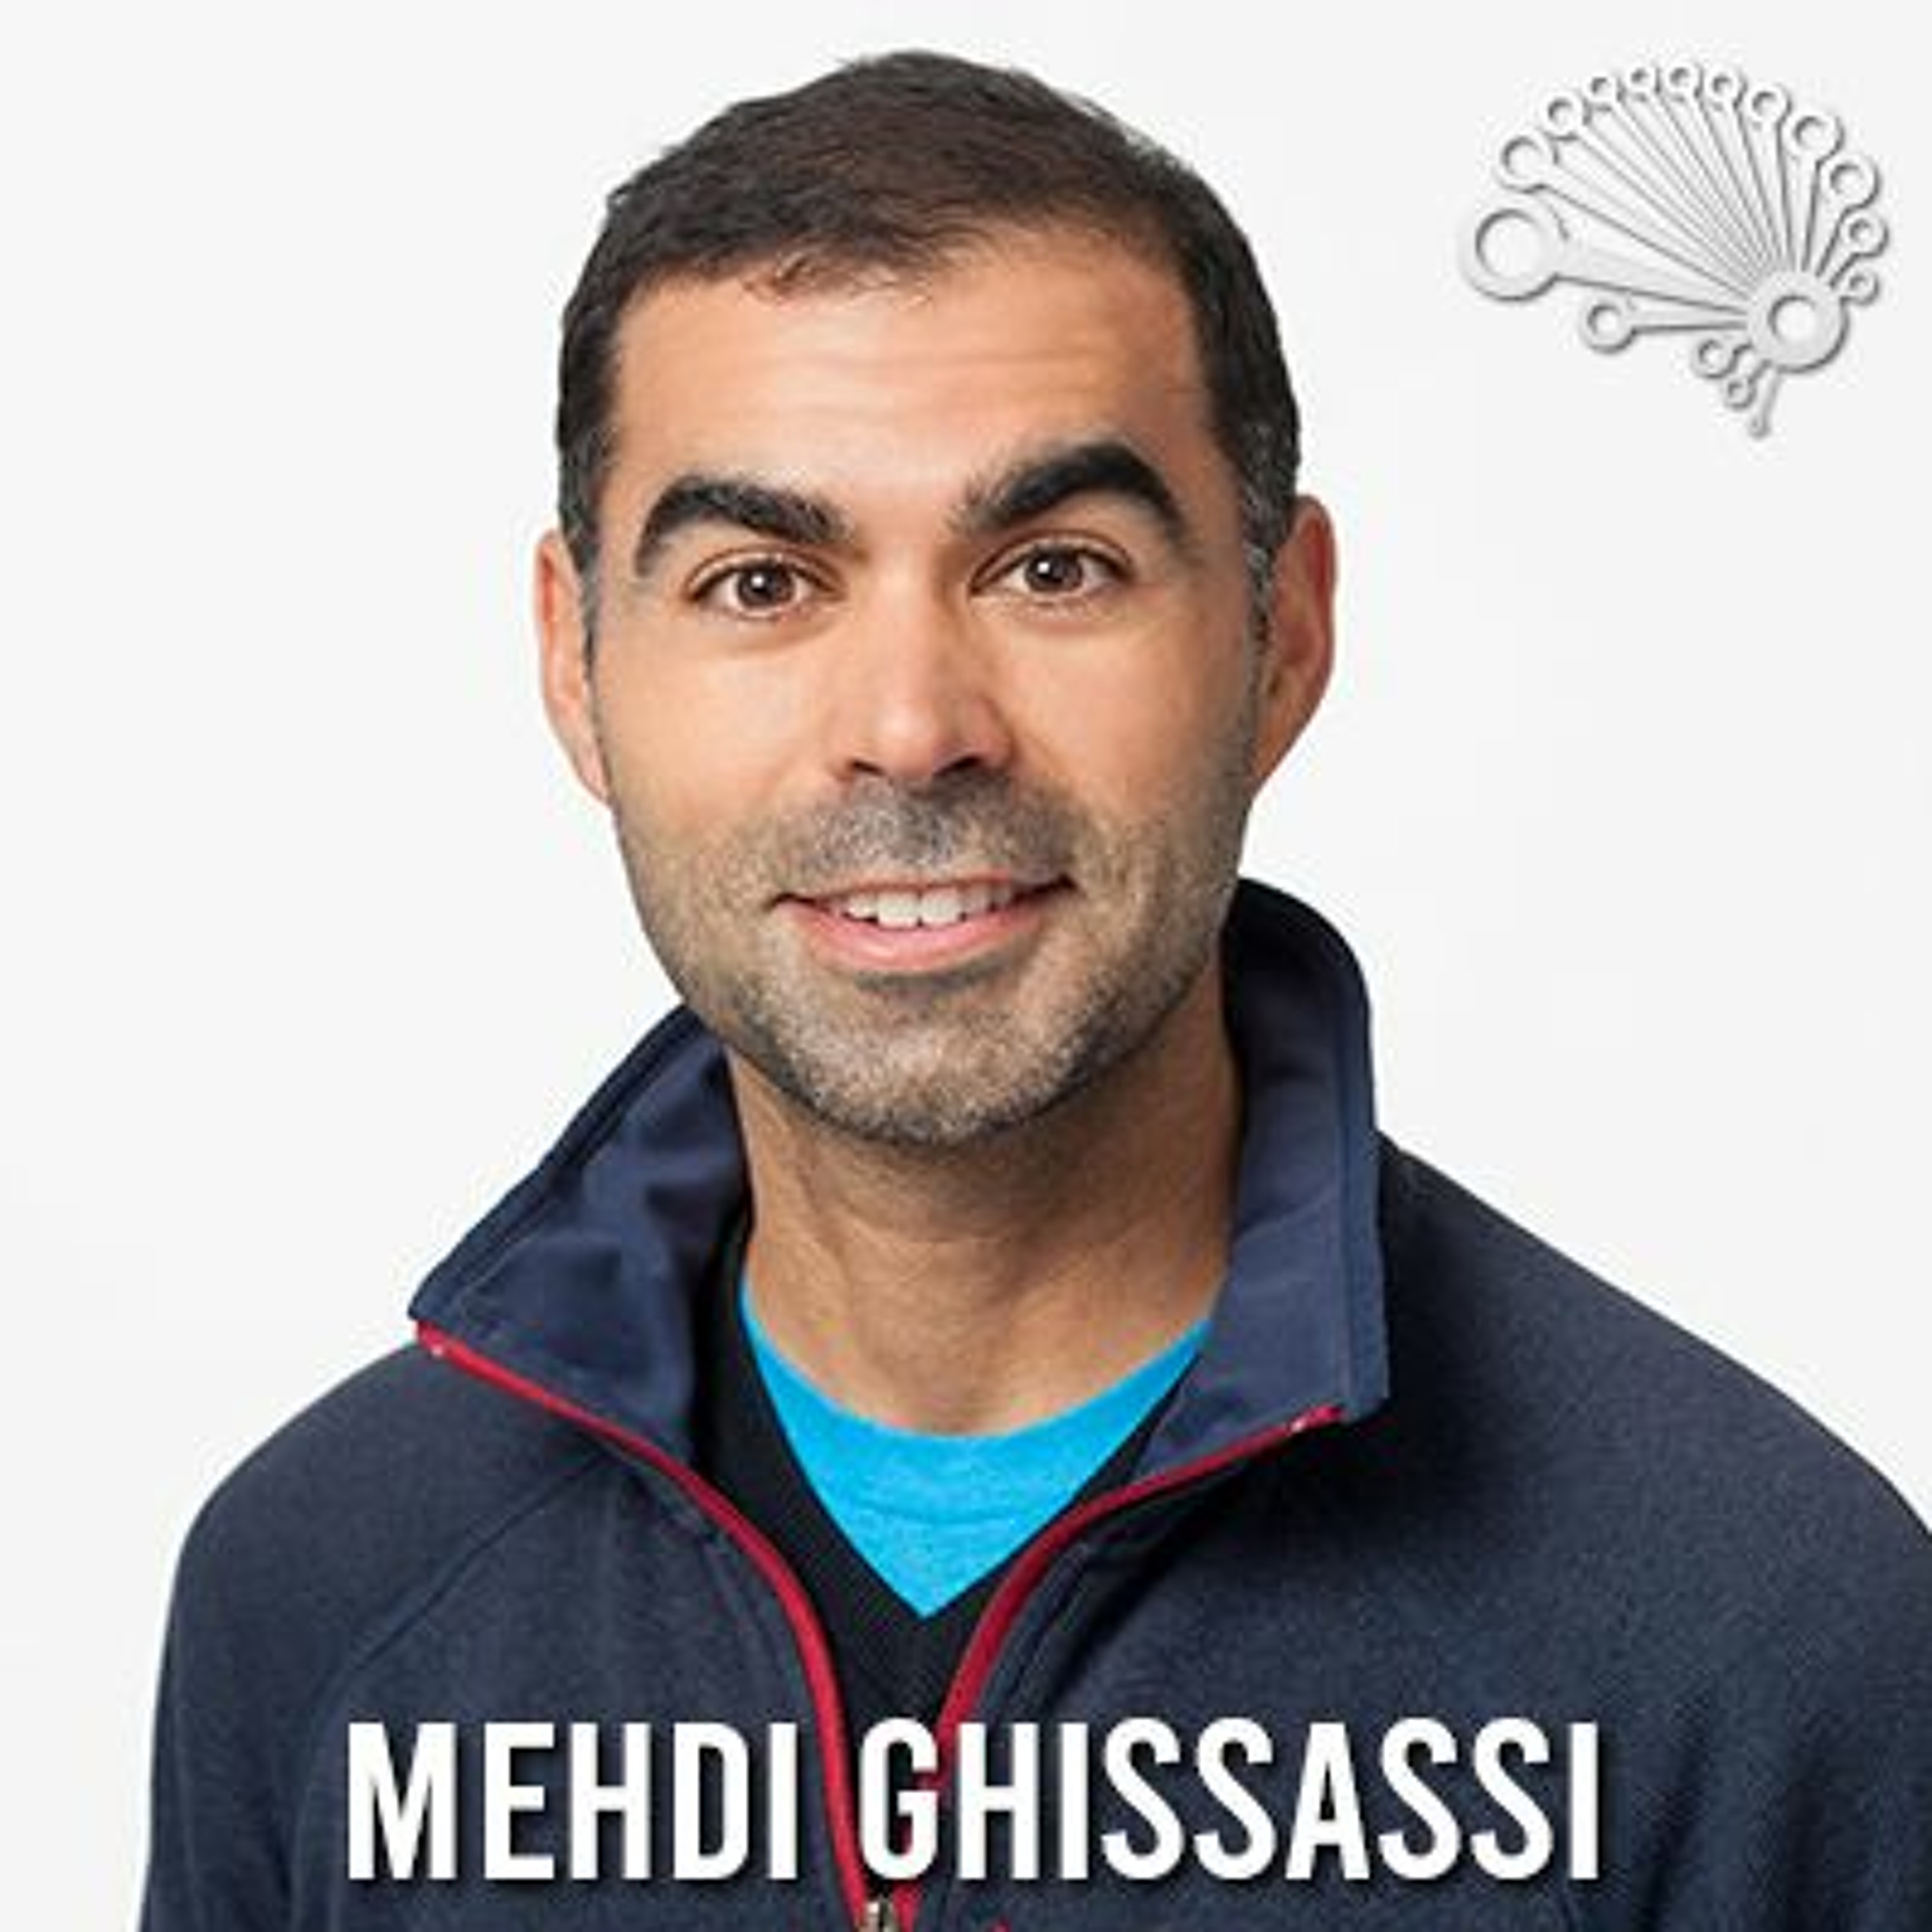 735: A.I. Product Management, with Google DeepMind's Head of Product, Mehdi Ghissassi